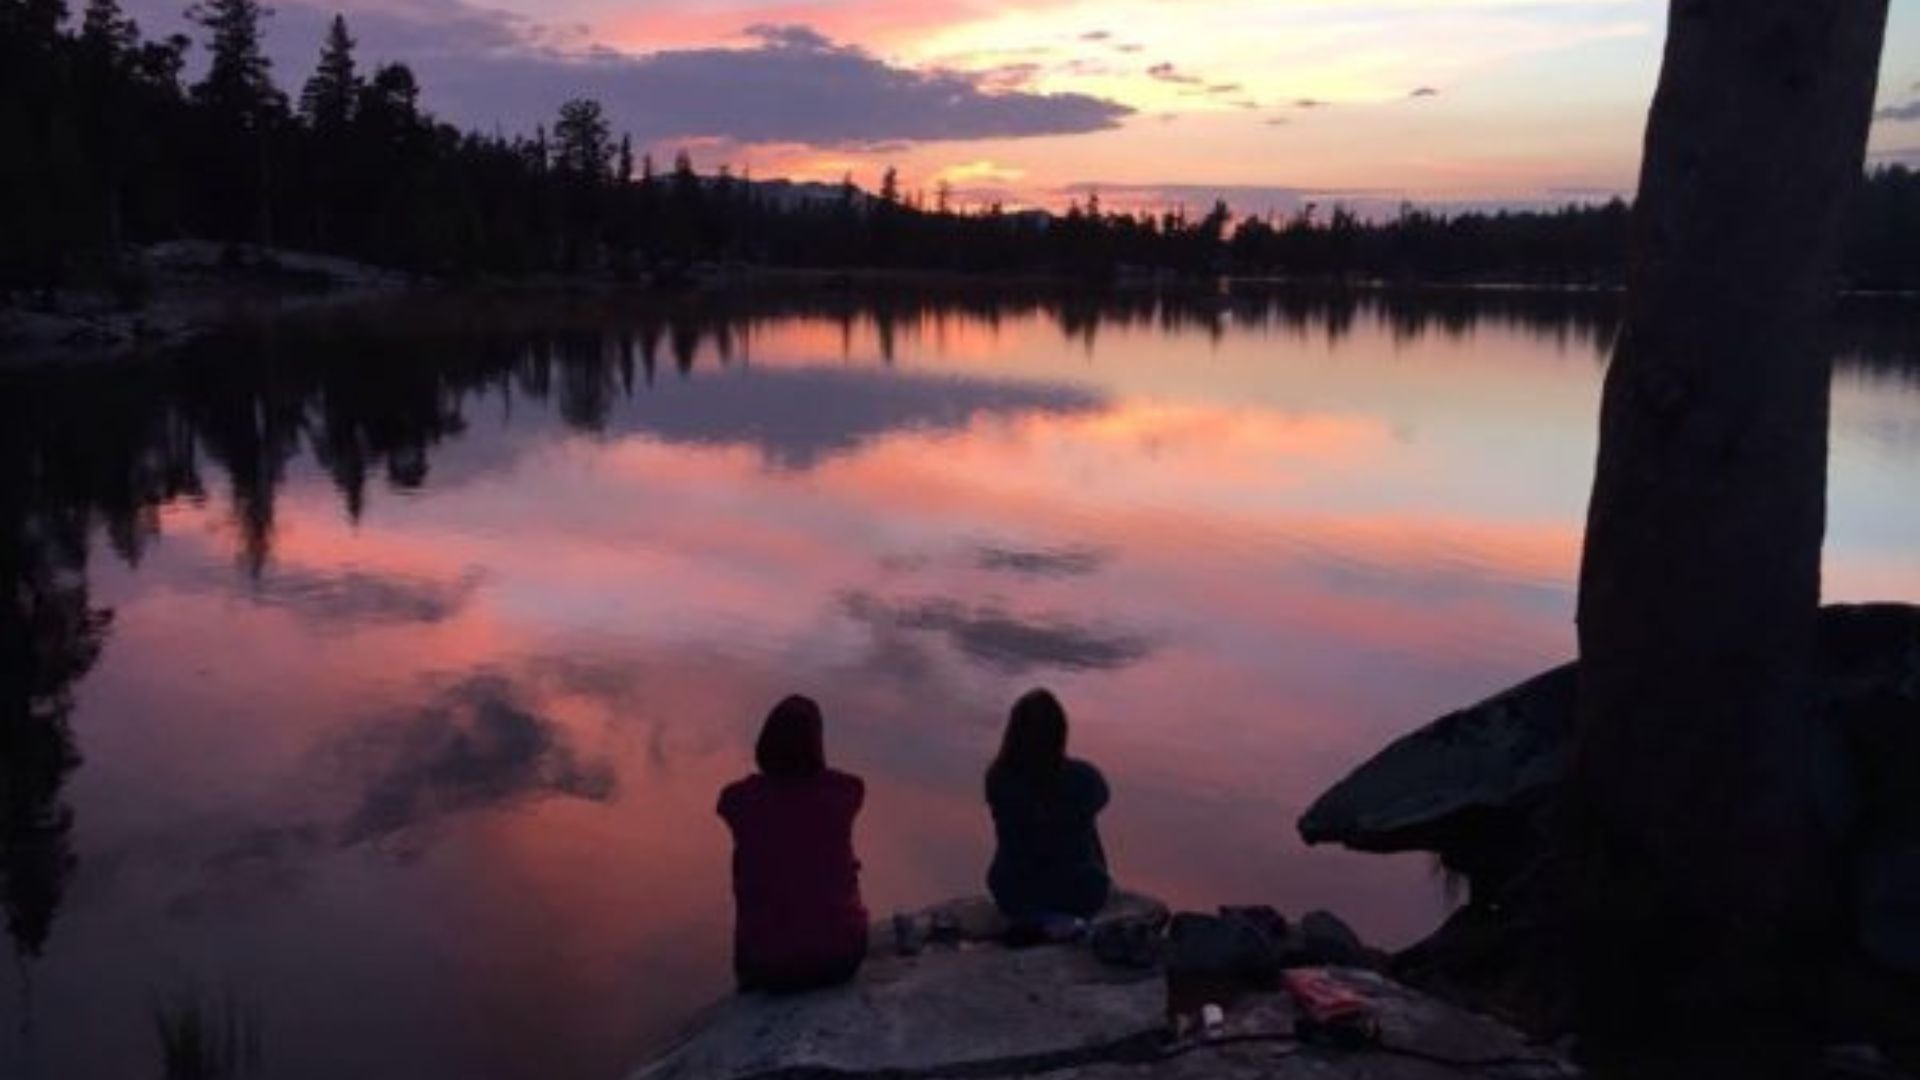 lake at sunset with two people sitting on rock looking out